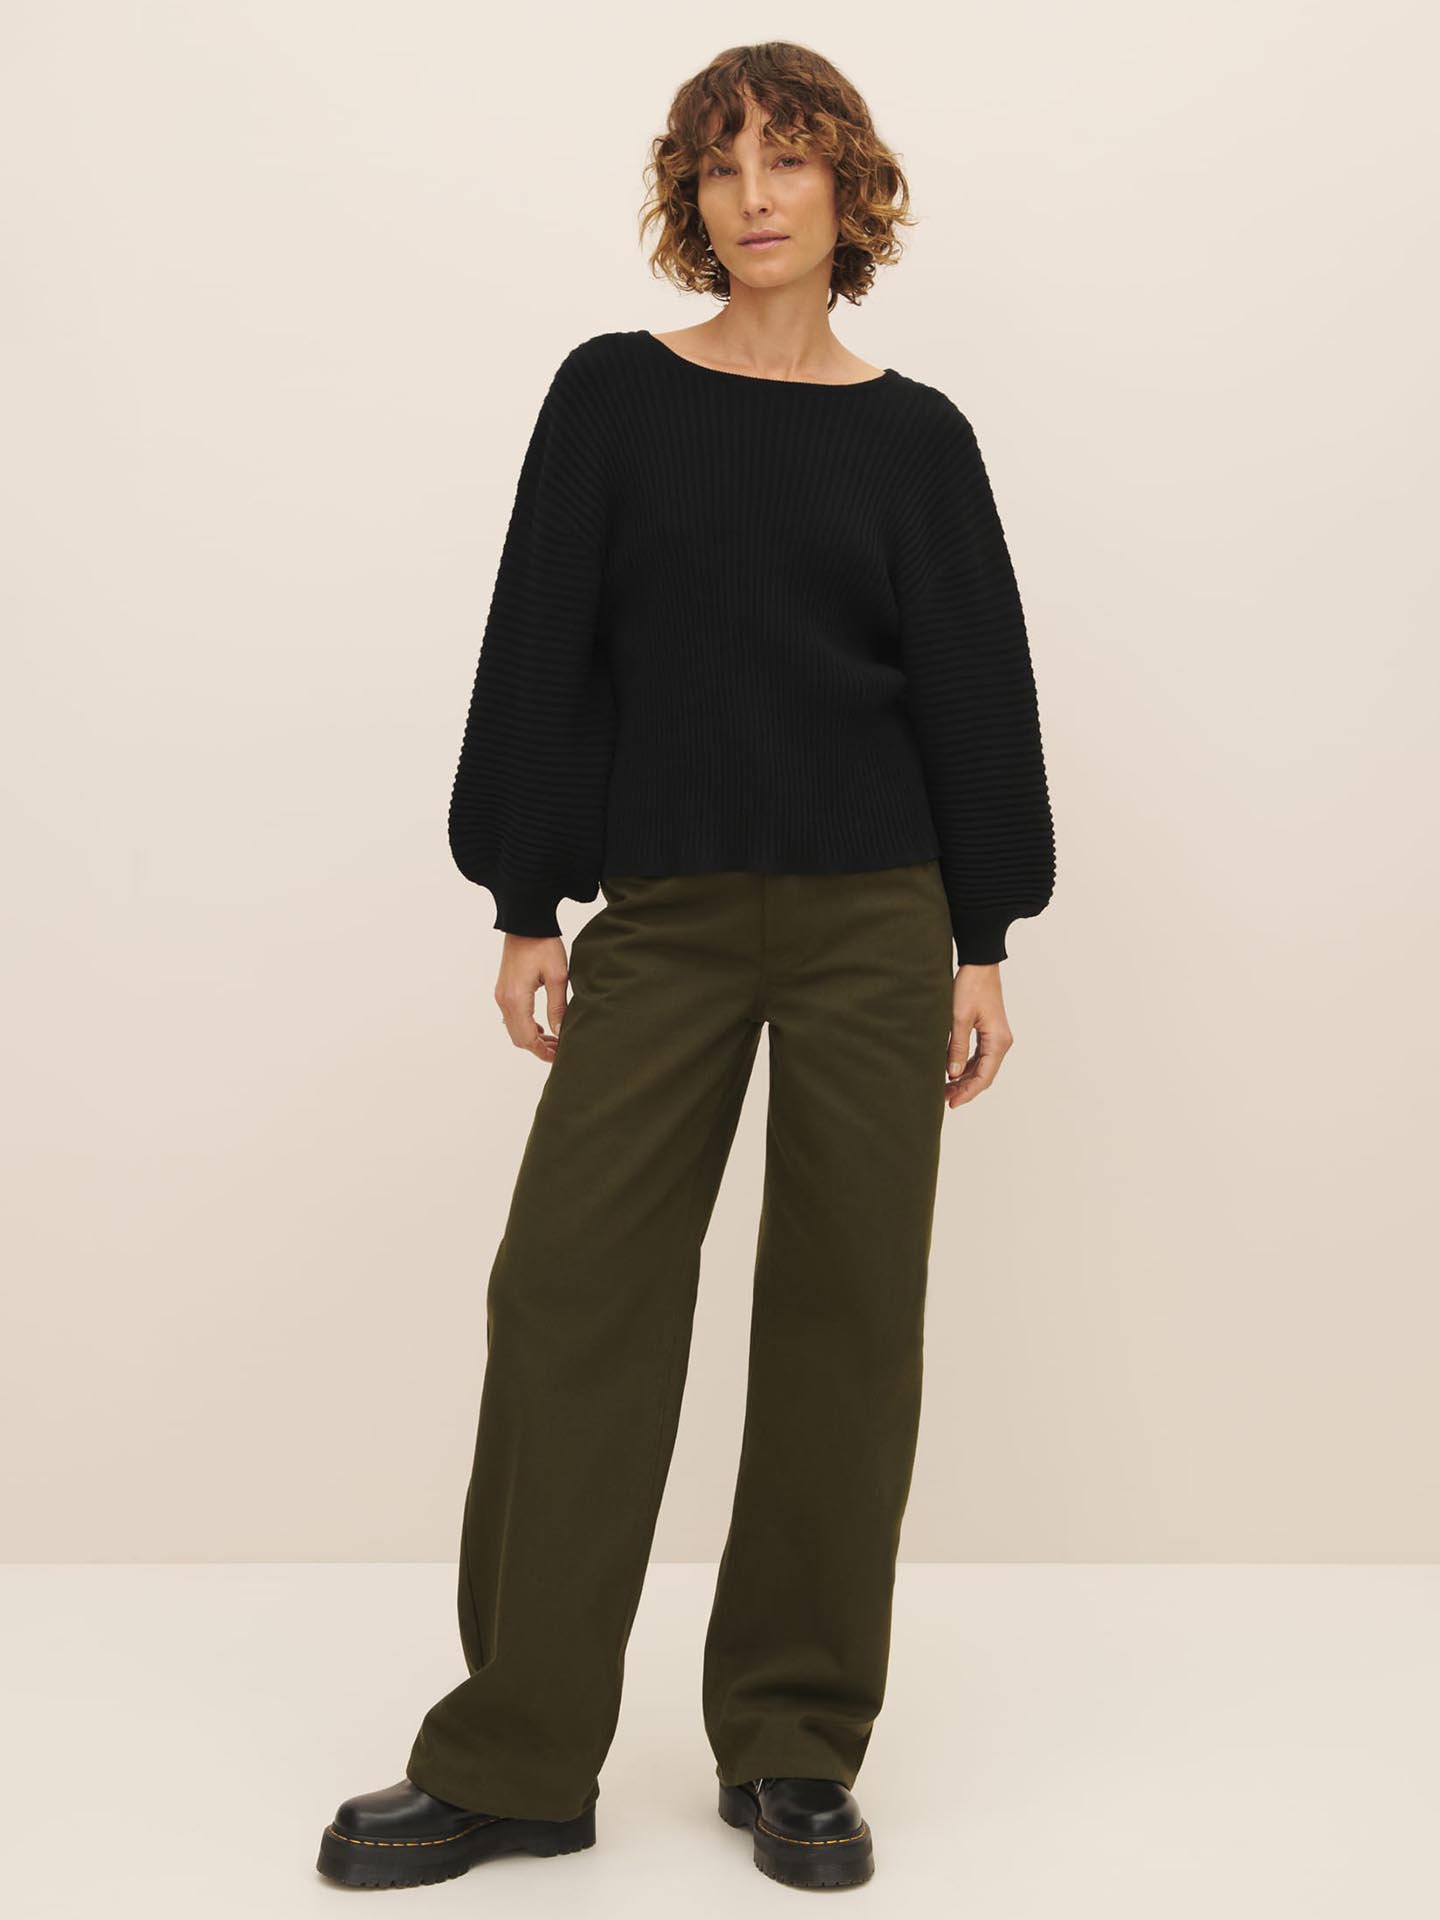 A woman stands against a neutral background wearing a black rib knit Cassia Sweater made of Fairtrade organic cotton and olive green trousers with black platform shoes from Kowtow.